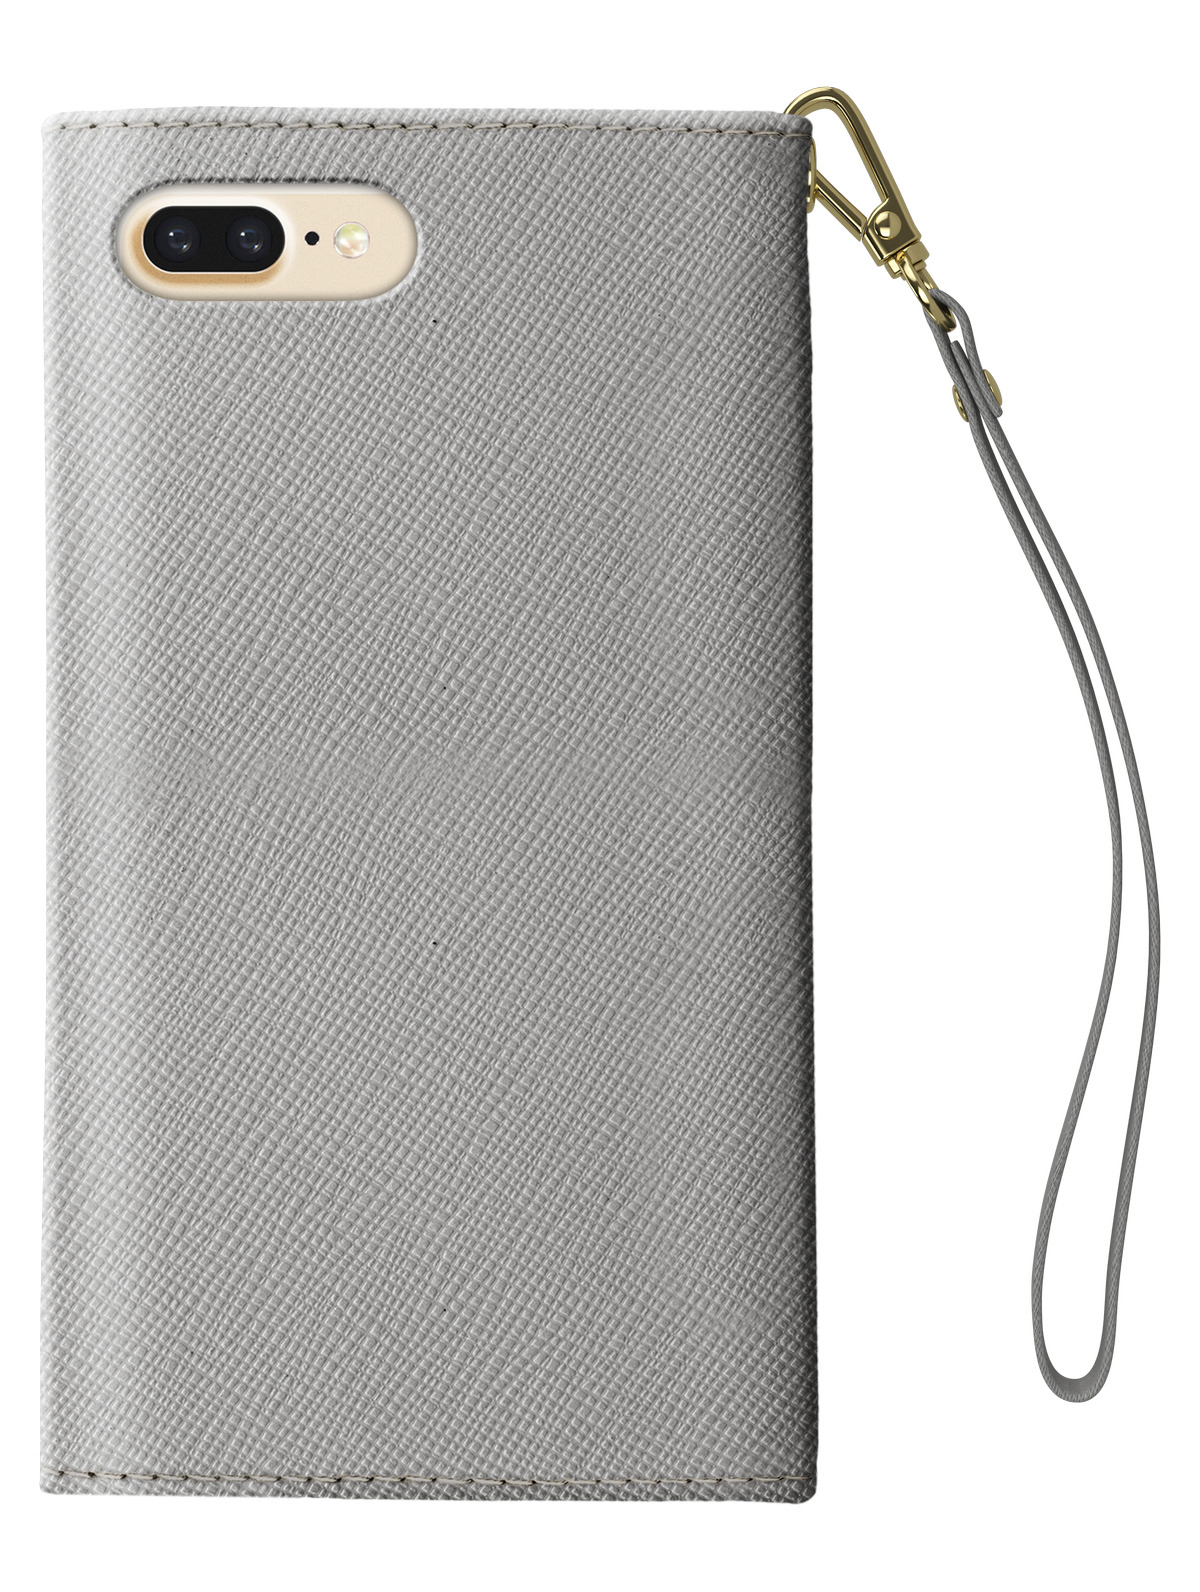 iPhone Clutch, Mayfair SWEDEN 8, Grau iPhone 6, 7, iPhone OF Bookcover, Apple, IDEAL